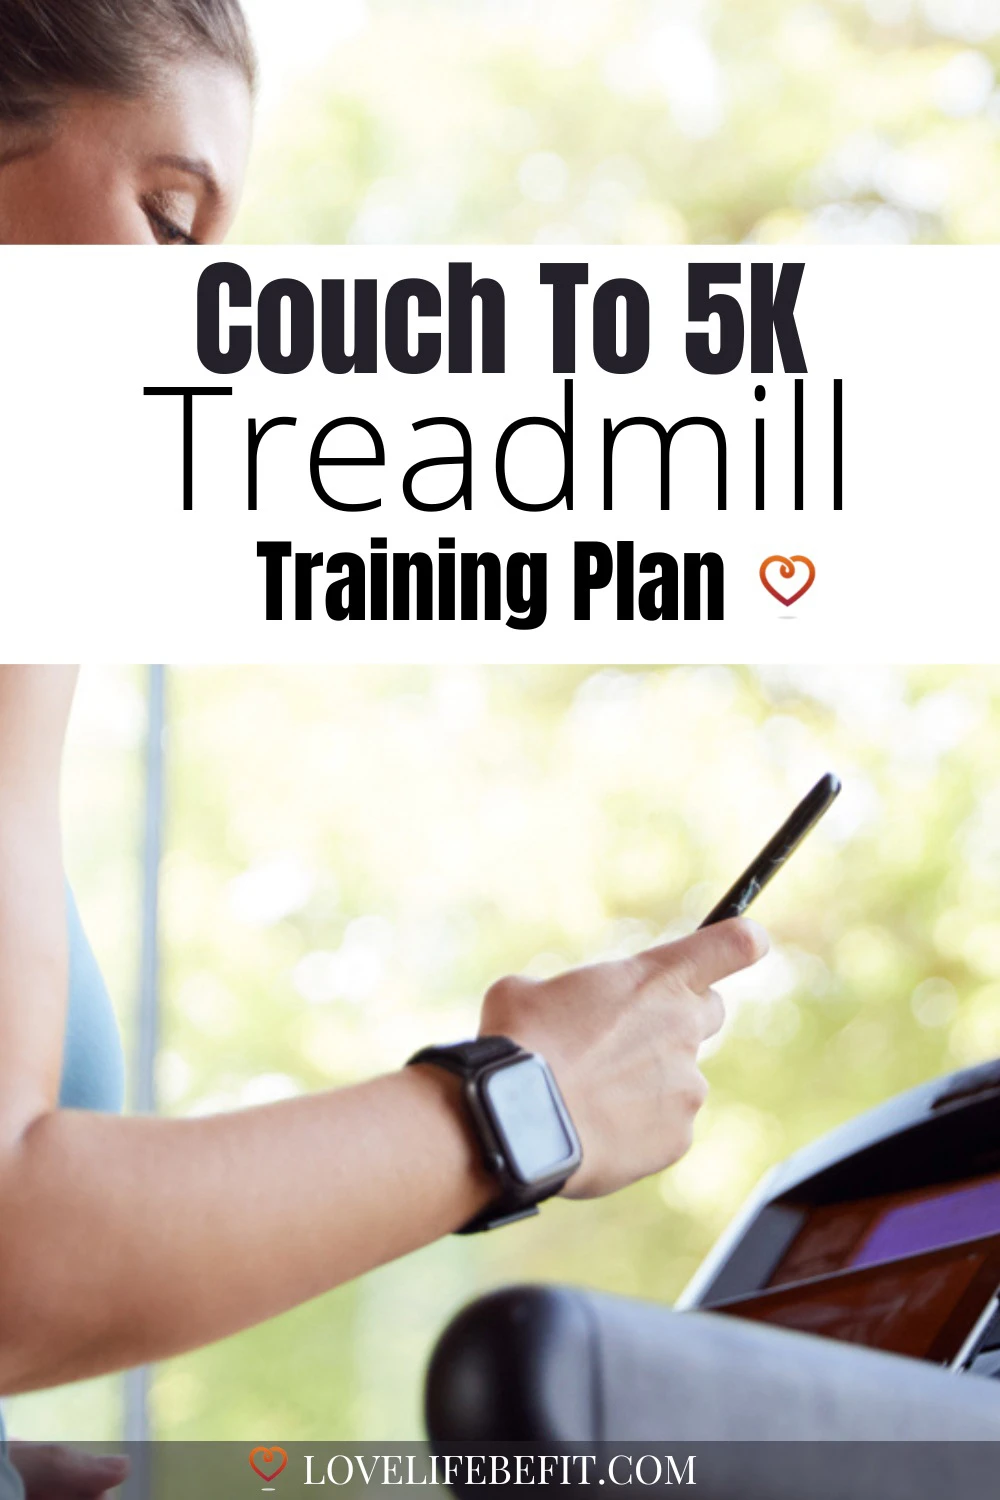 couch to 5k treadmill training plan